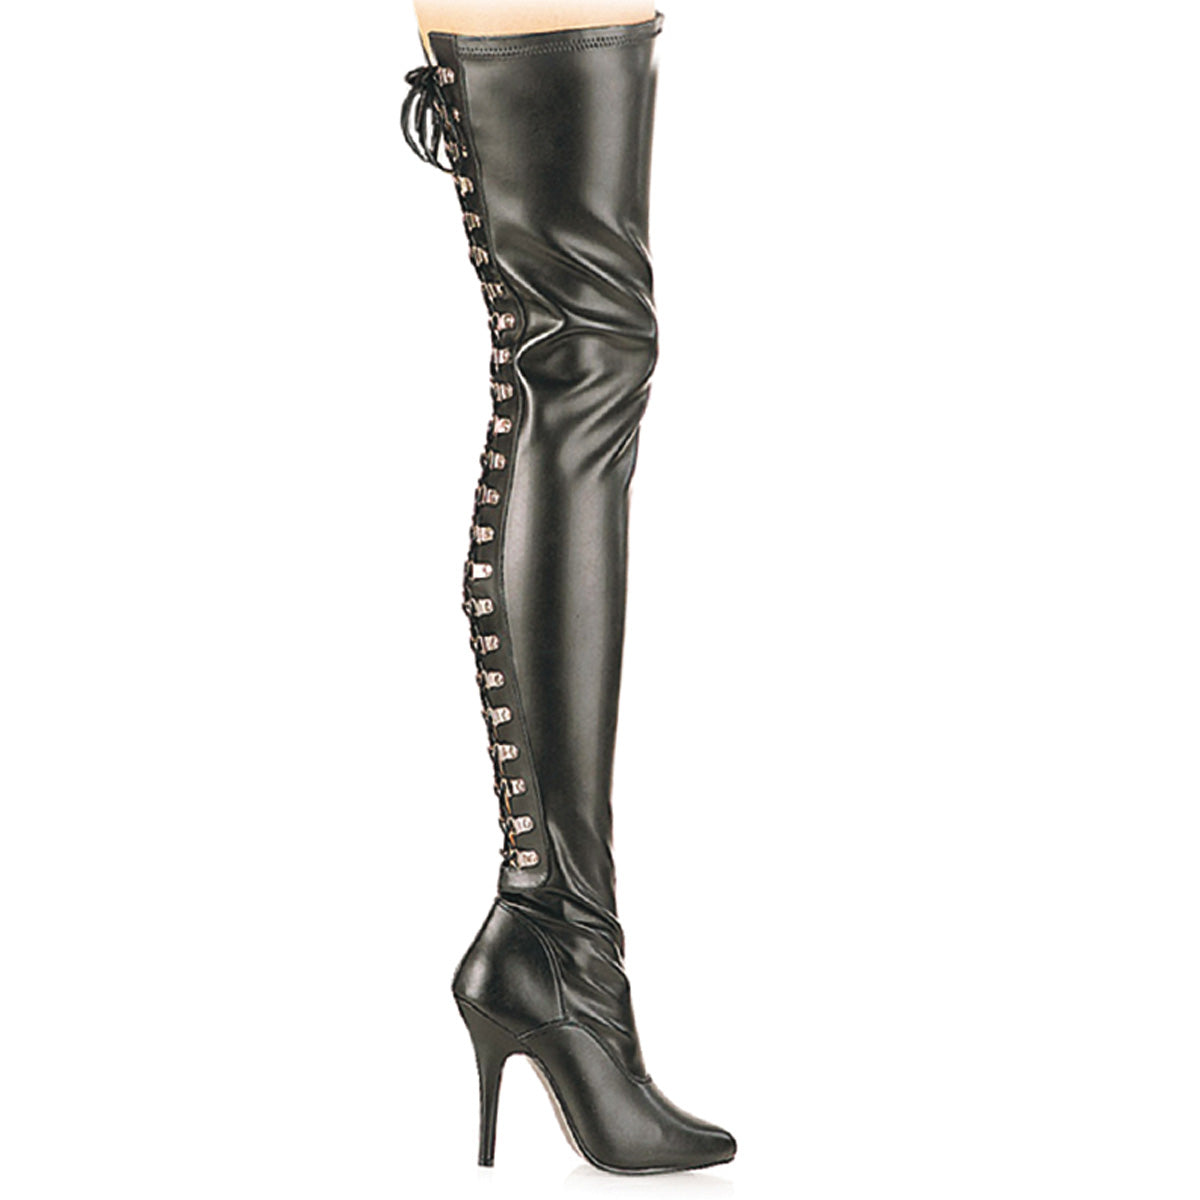 SEDUCE-3063 Pleaser Thigh Boots 5" Heel Black Fetish Shoes-Pleaser- Sexy Shoes